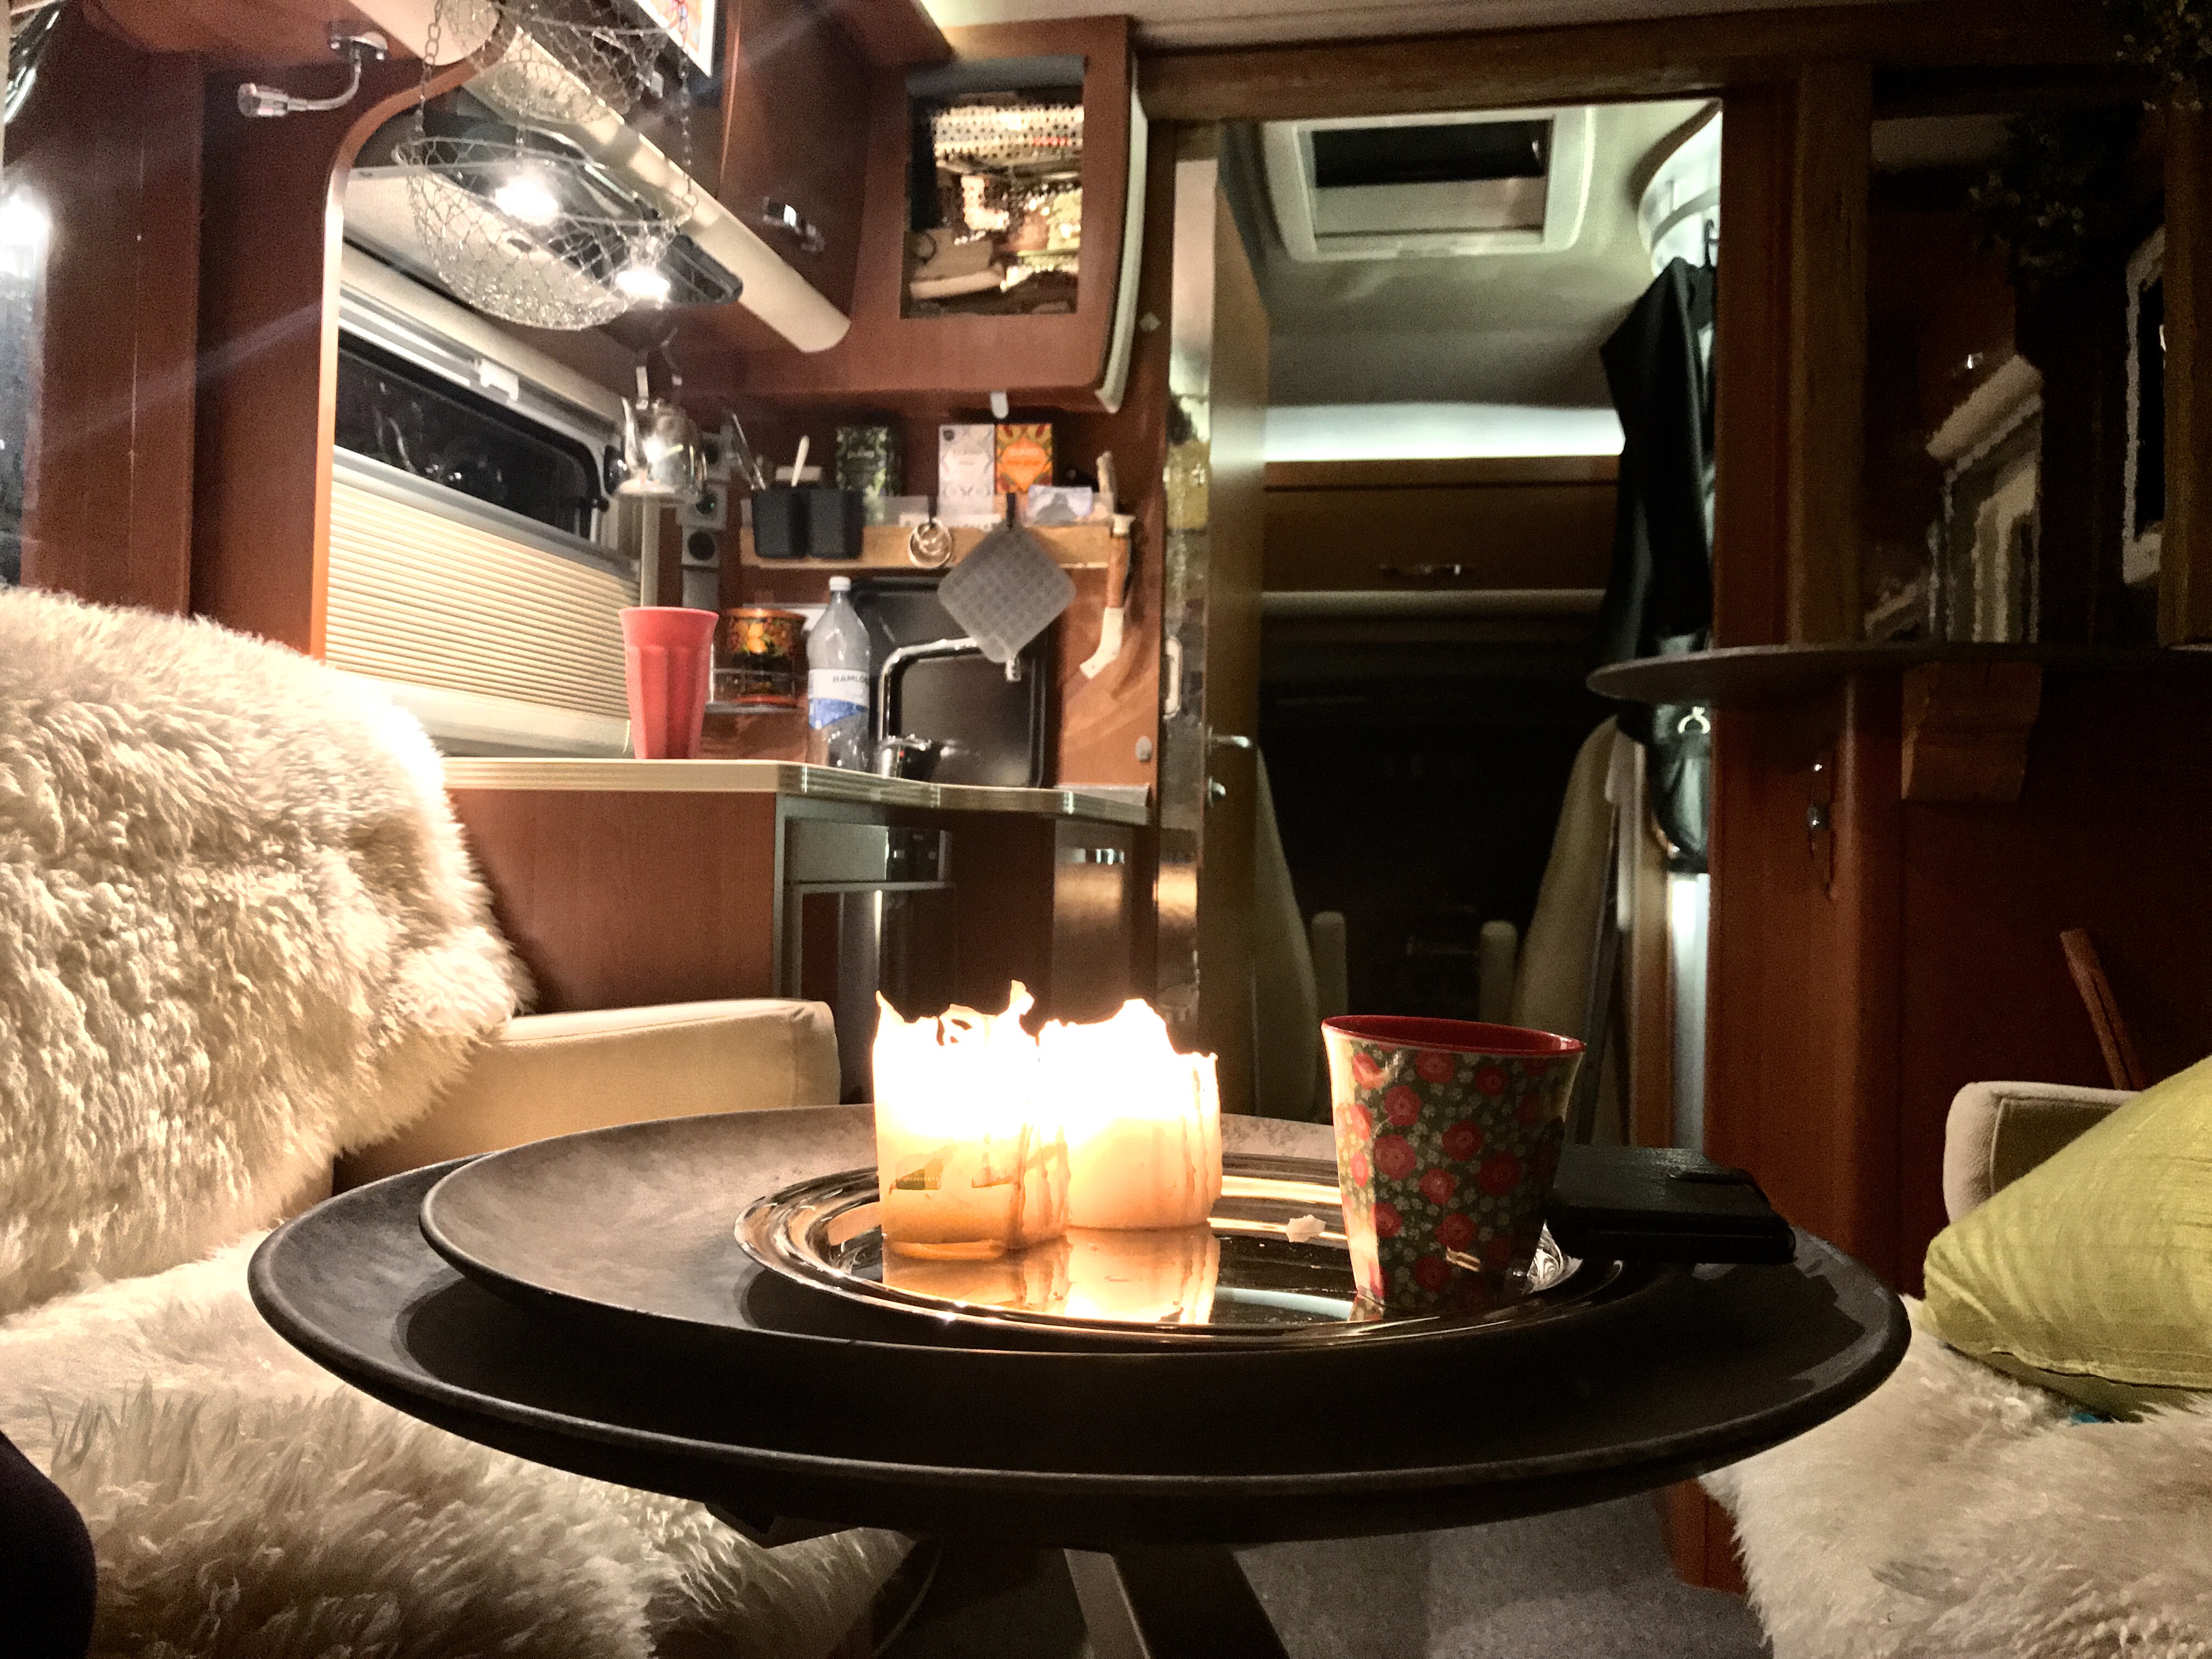 Mobile home interieur at night